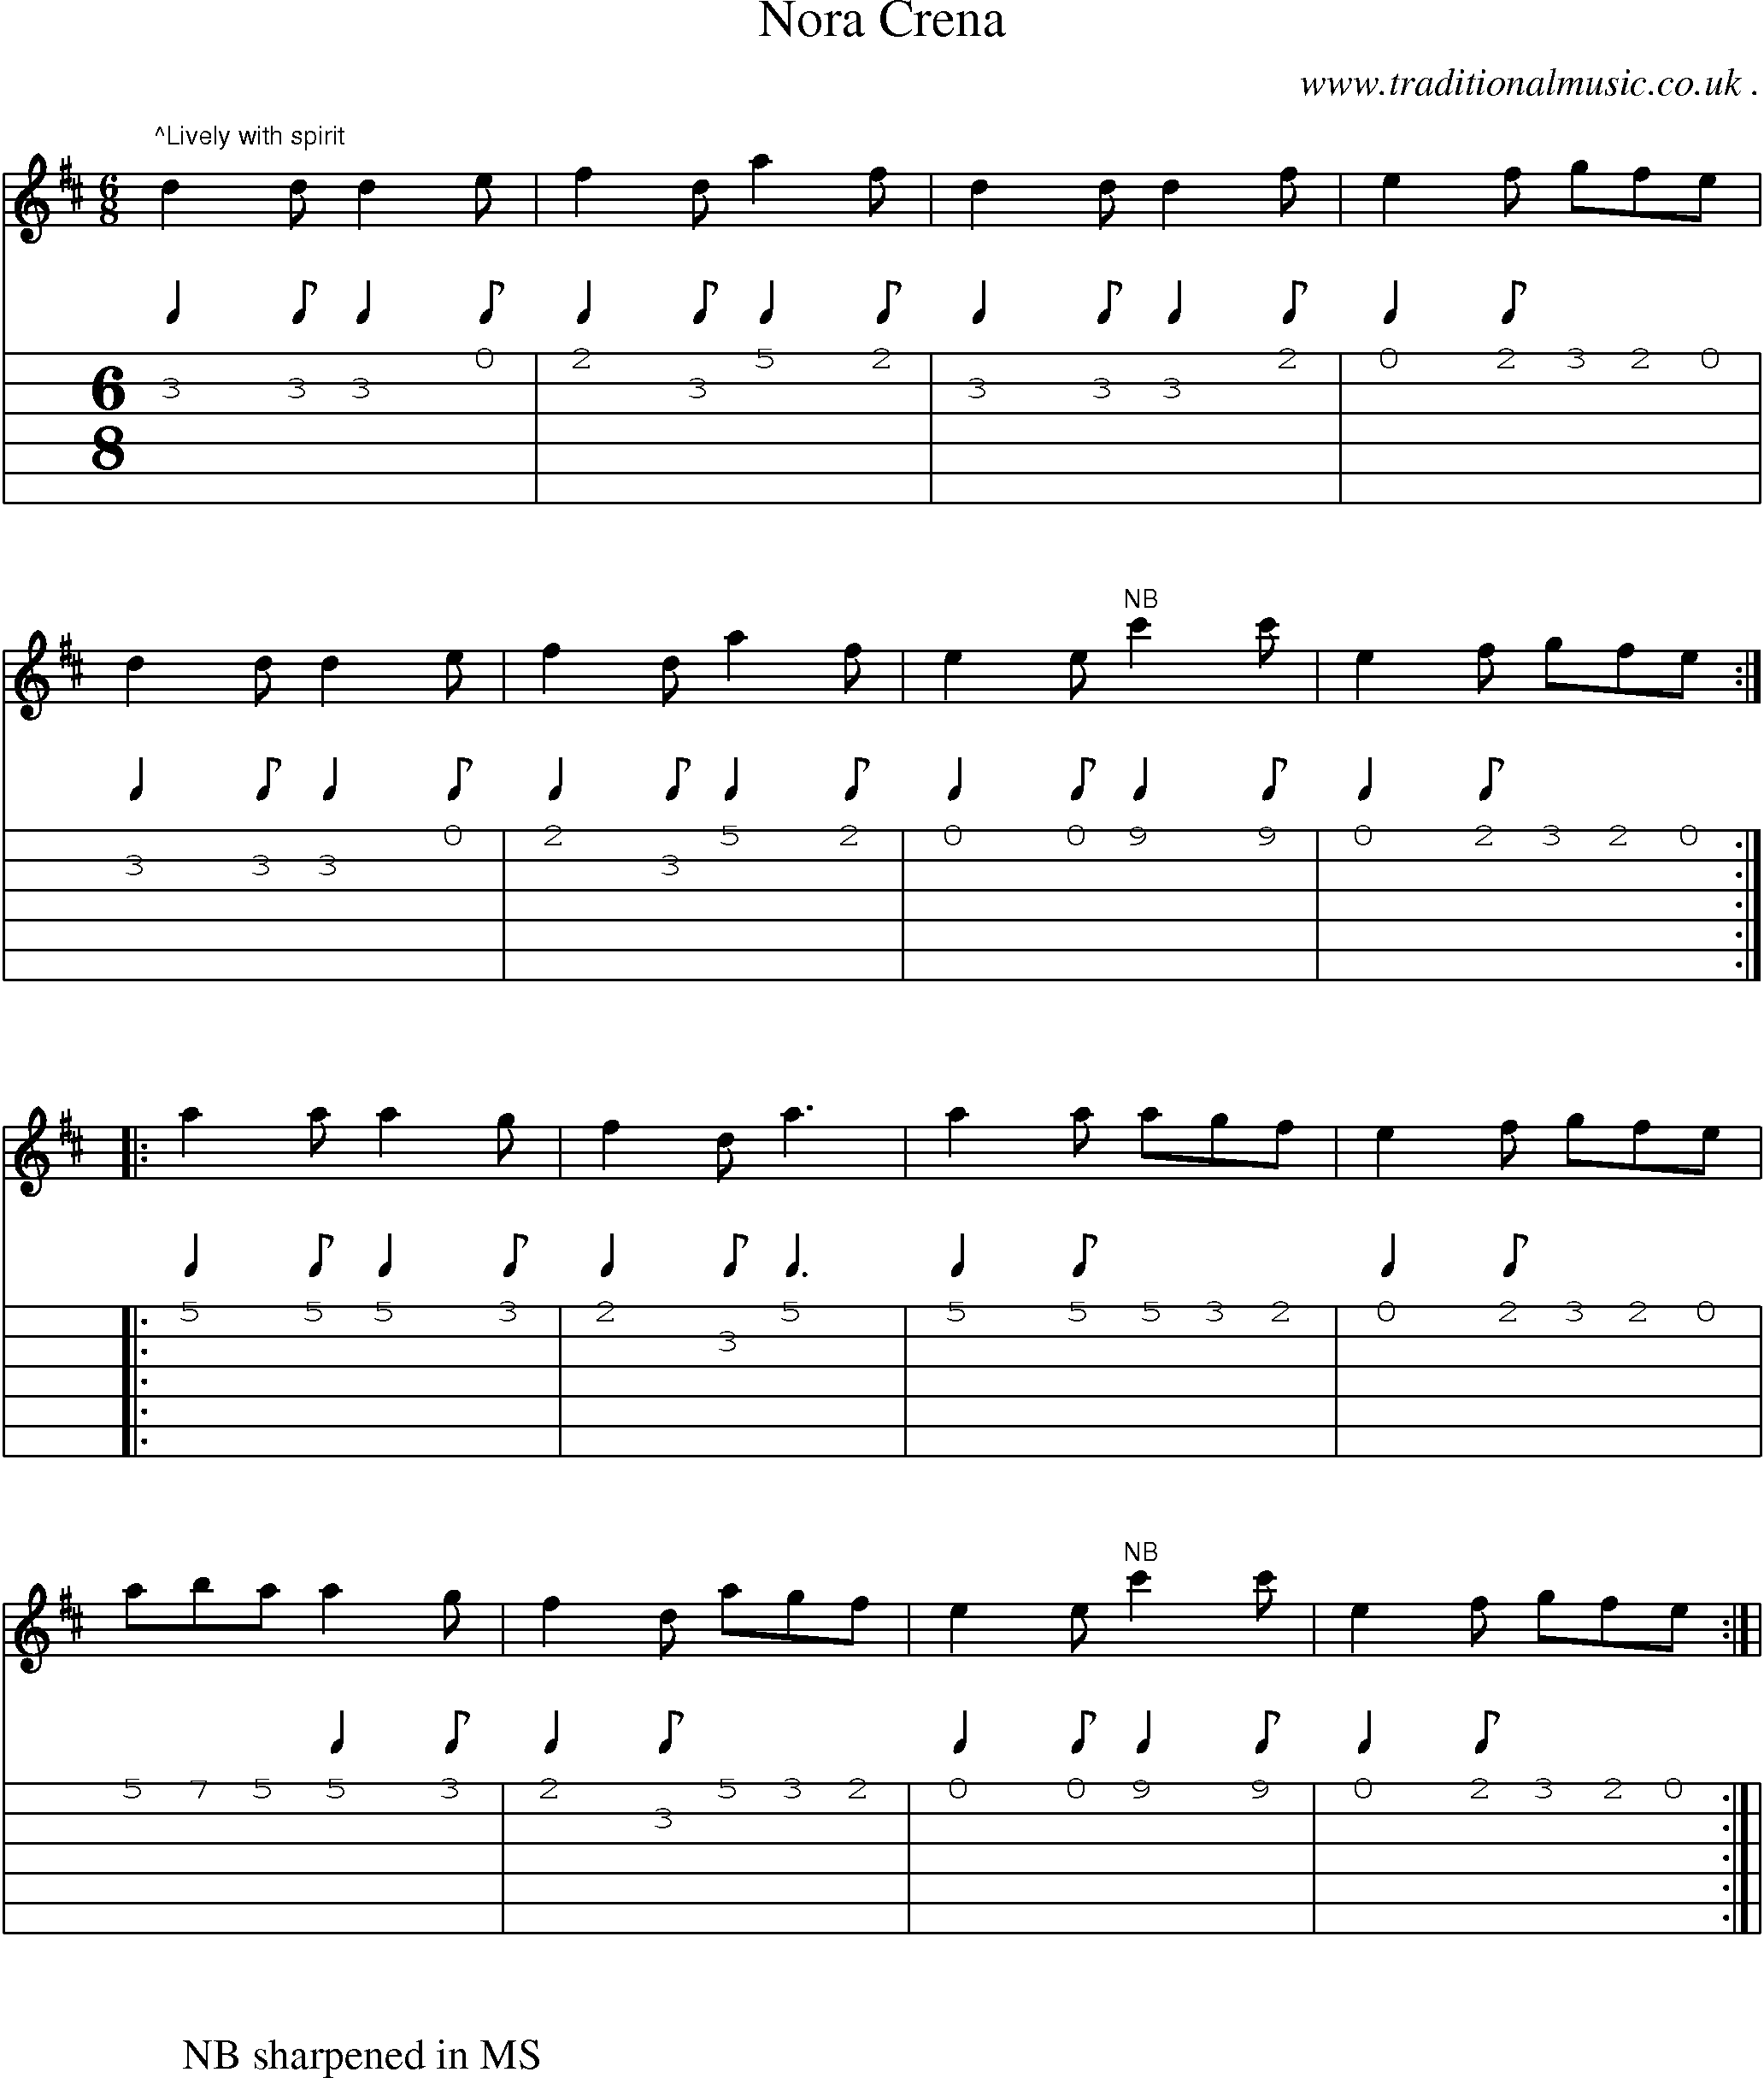 Sheet-Music and Guitar Tabs for Nora Crena